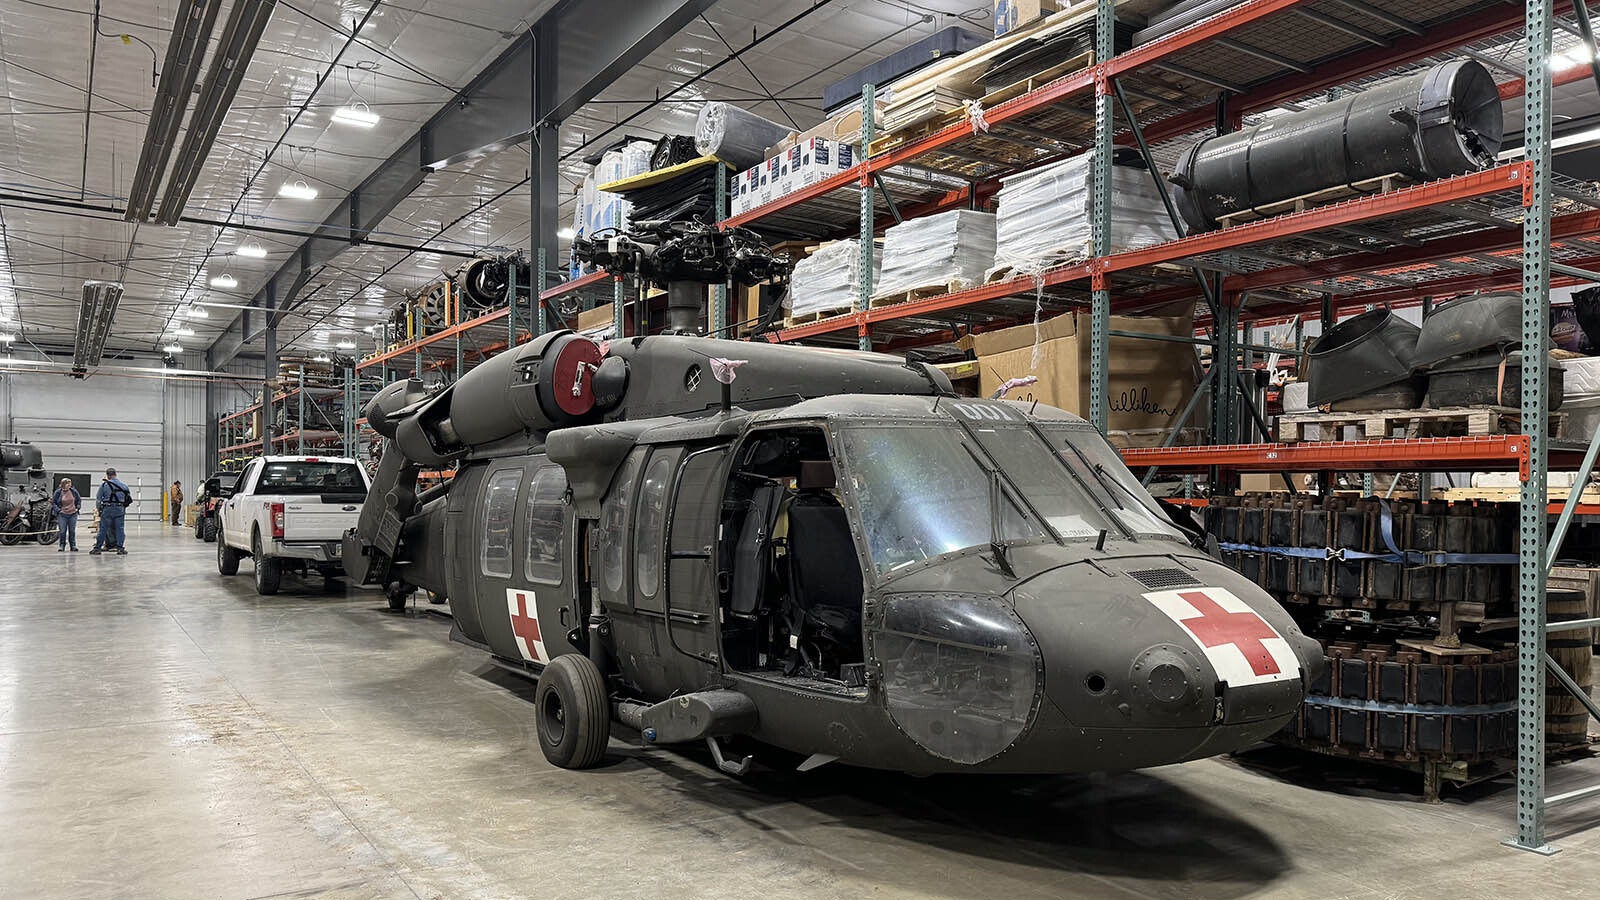 A helicopter awaits its turn for restoration.